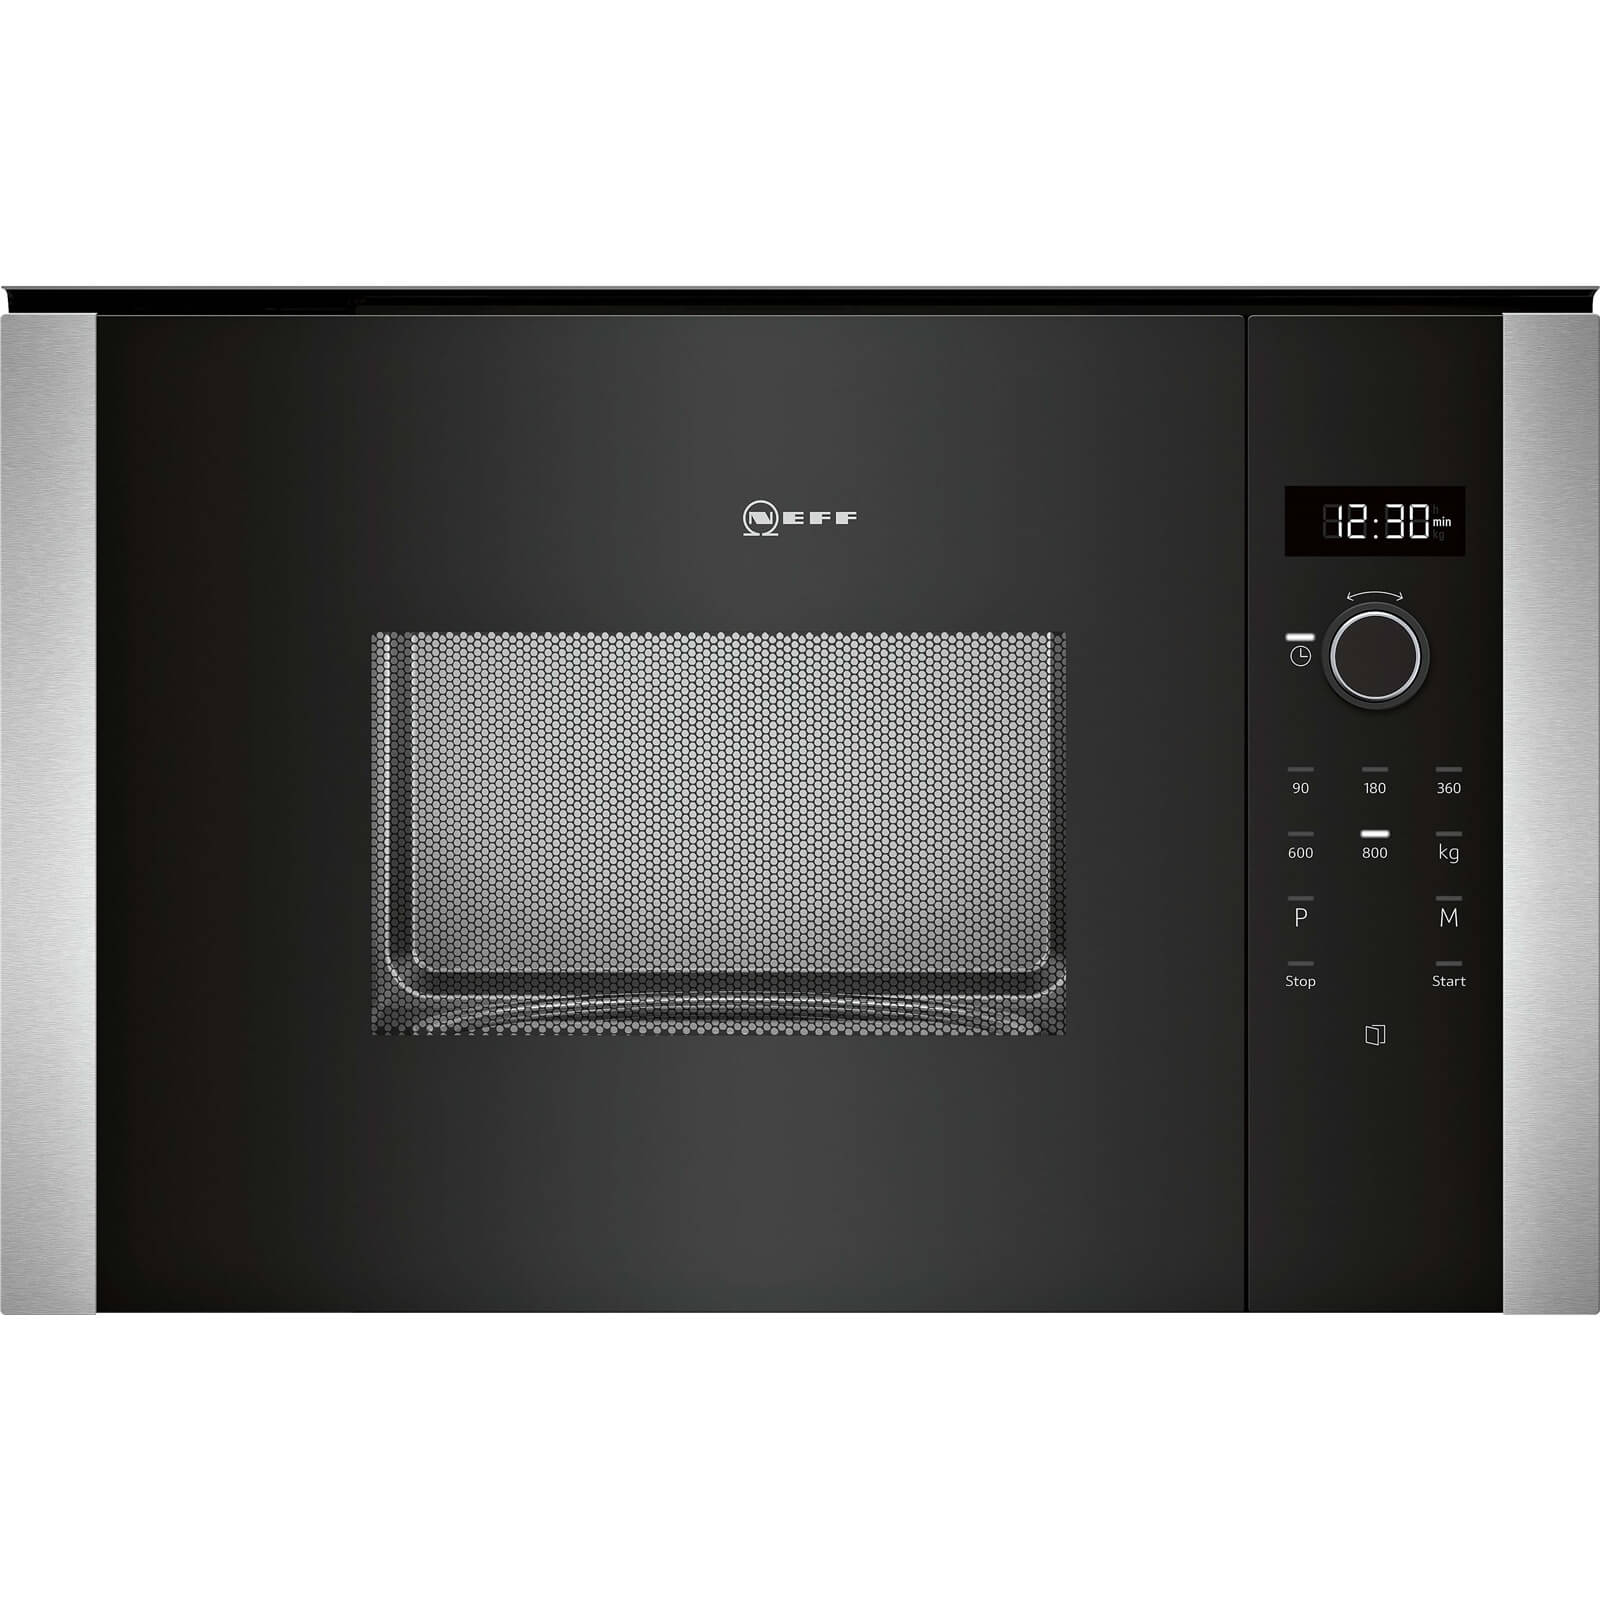 NEFF HLAWD23N0B Microwave Oven